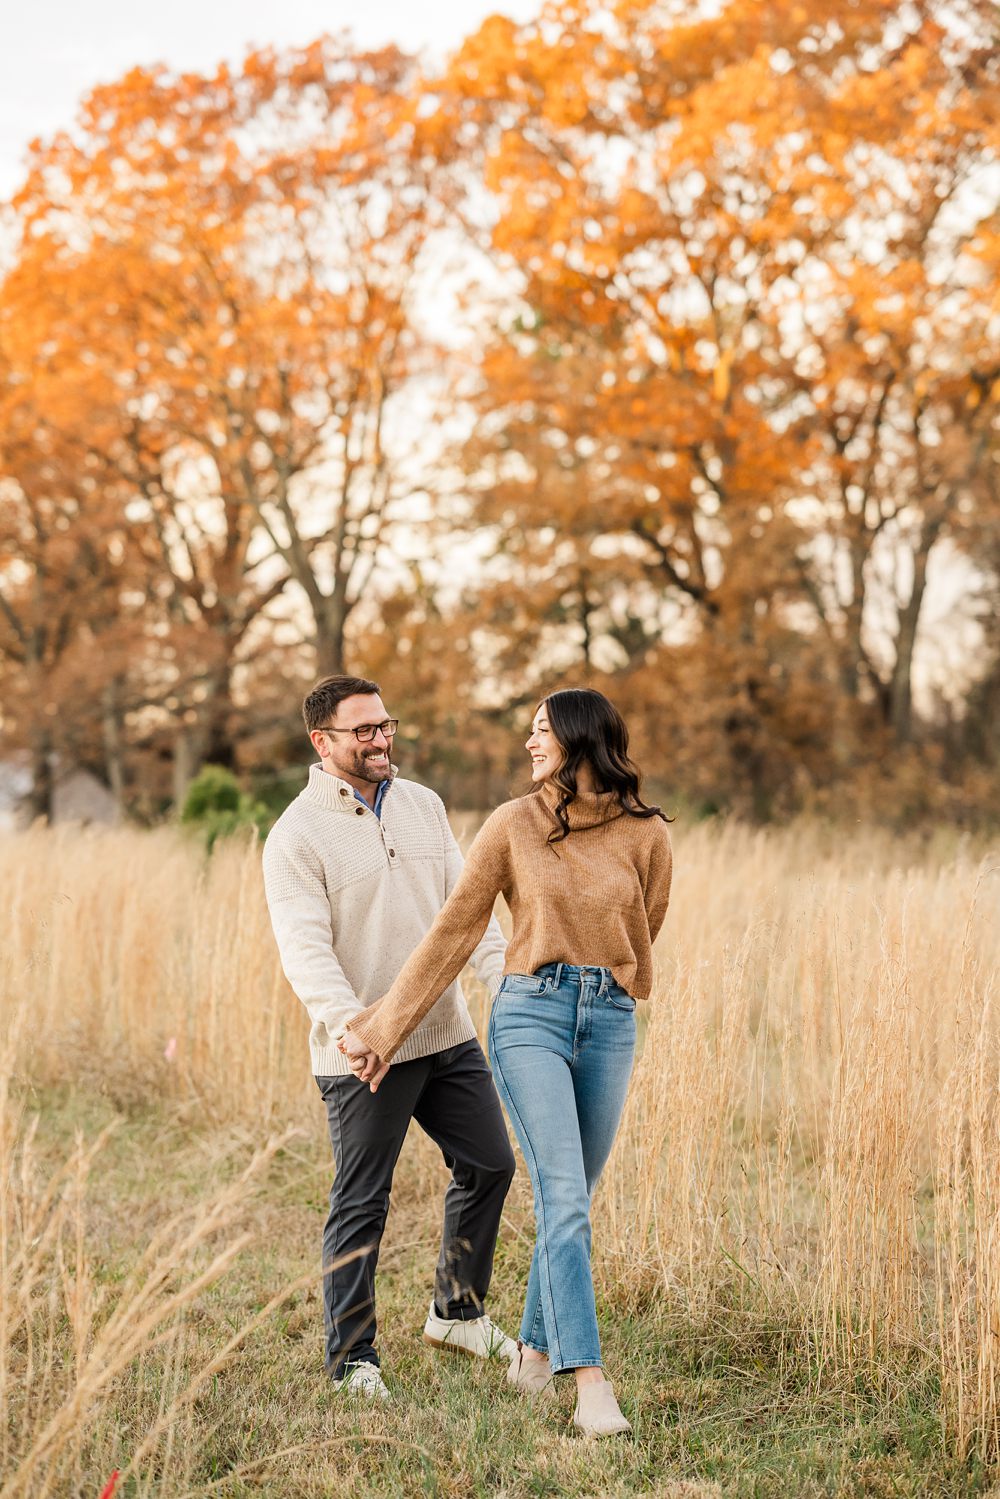 A Fall Engagement Session at Windy Knoll Farms